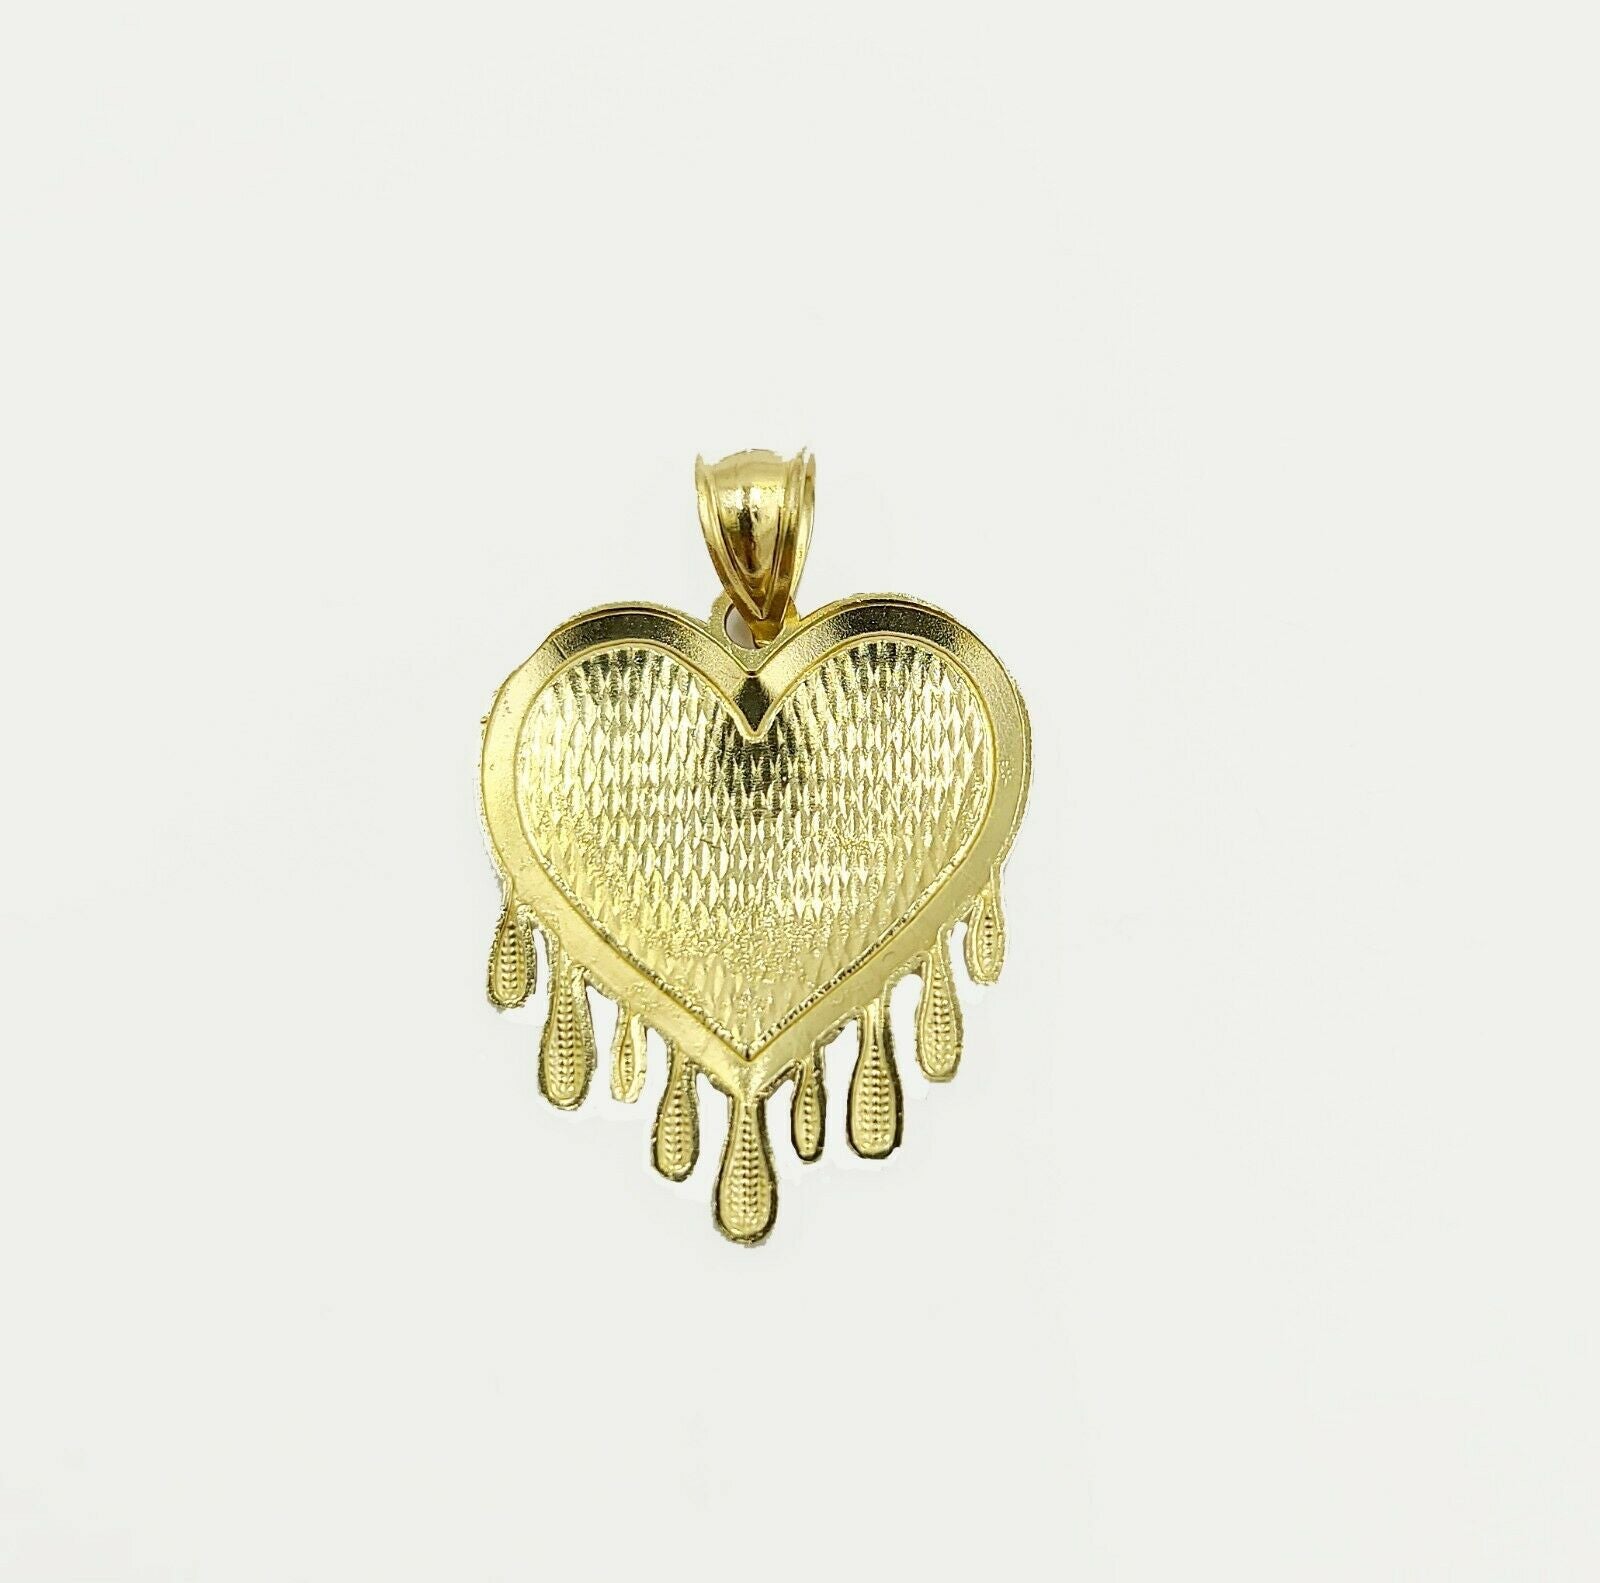 Real Gold Heart Pendant ladies Charm 10KT Yellow Gold Dripping Heart Love Oro